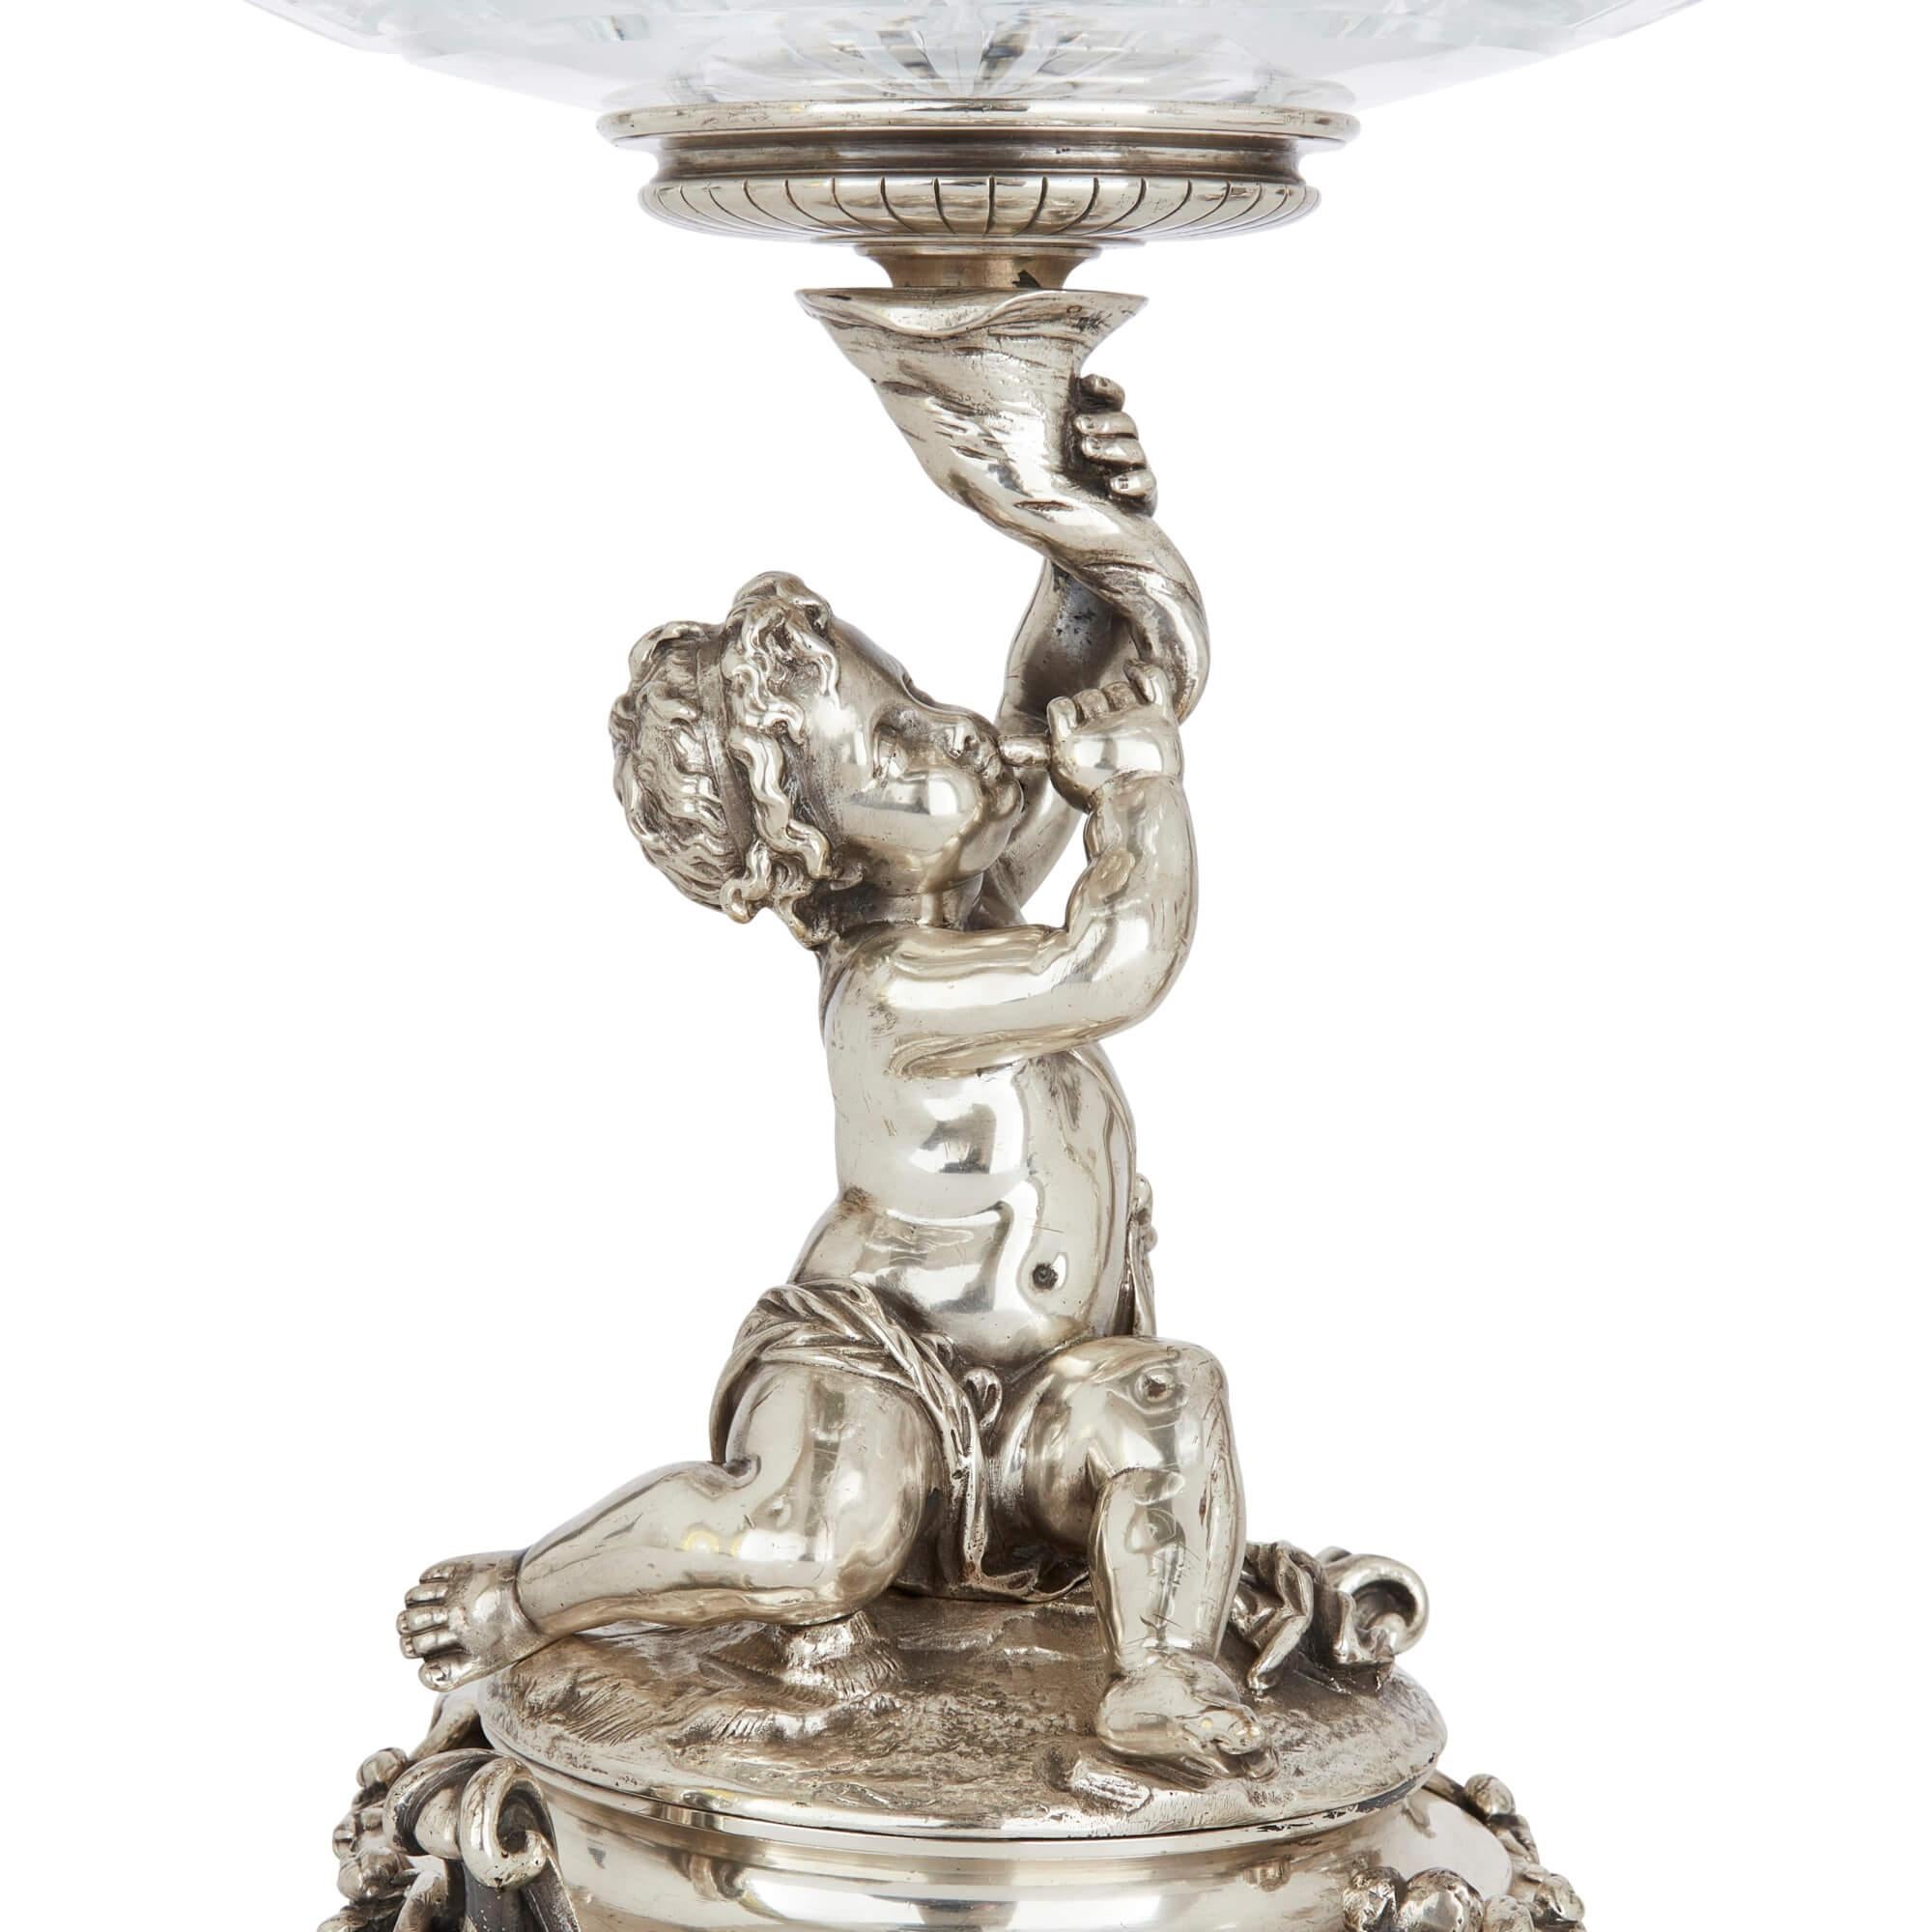 Rococo Revival Pair of 19th Century Cut-Glass and Silvered Bronze Compotes by Christofle  For Sale